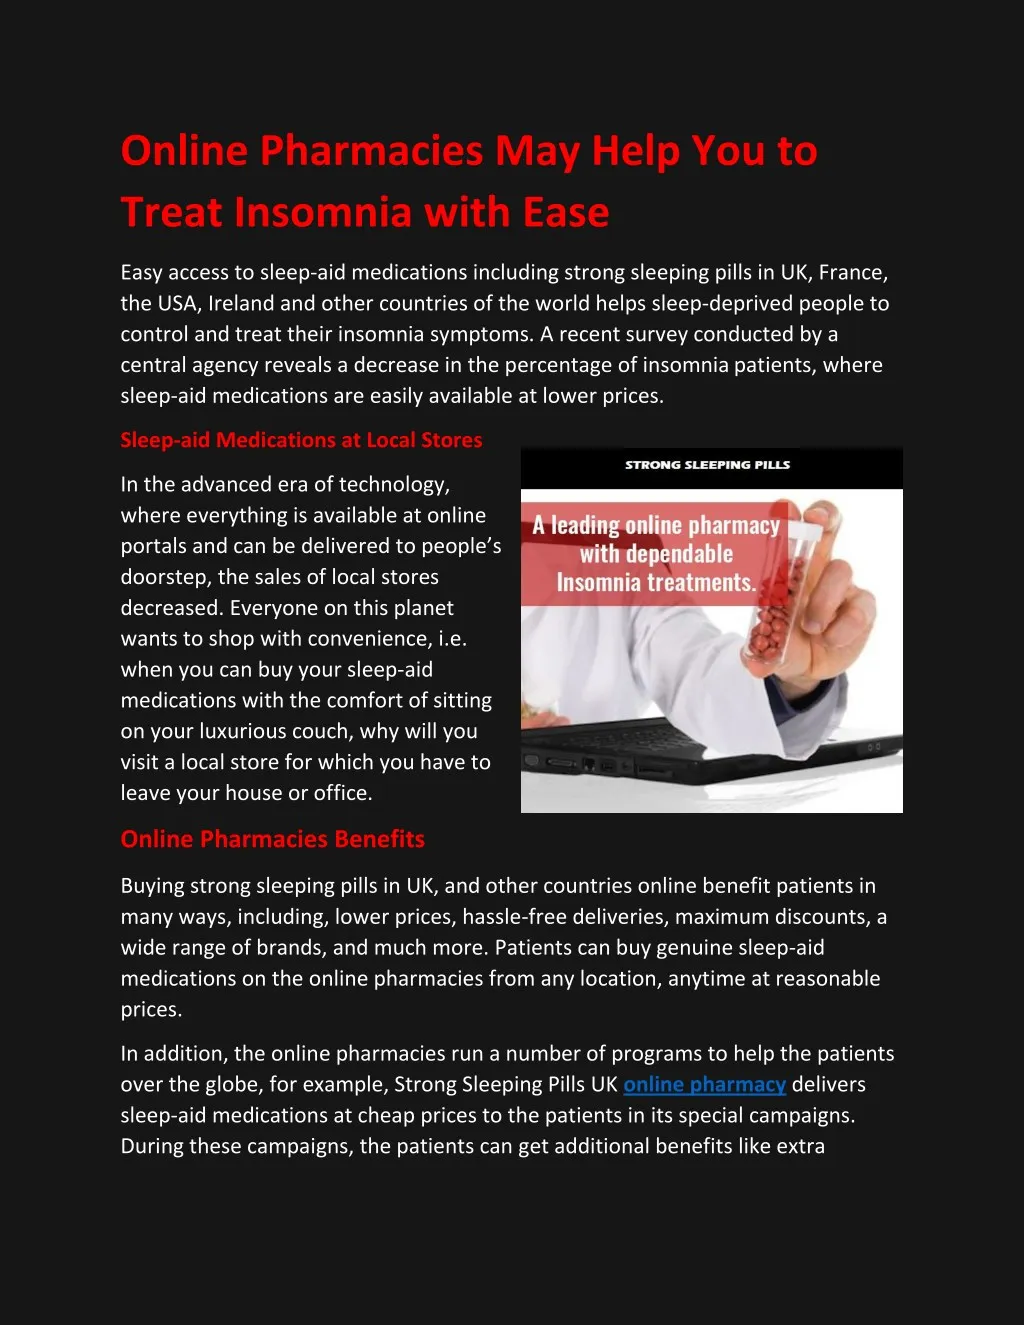 online pharmacies may help you to treat insomnia